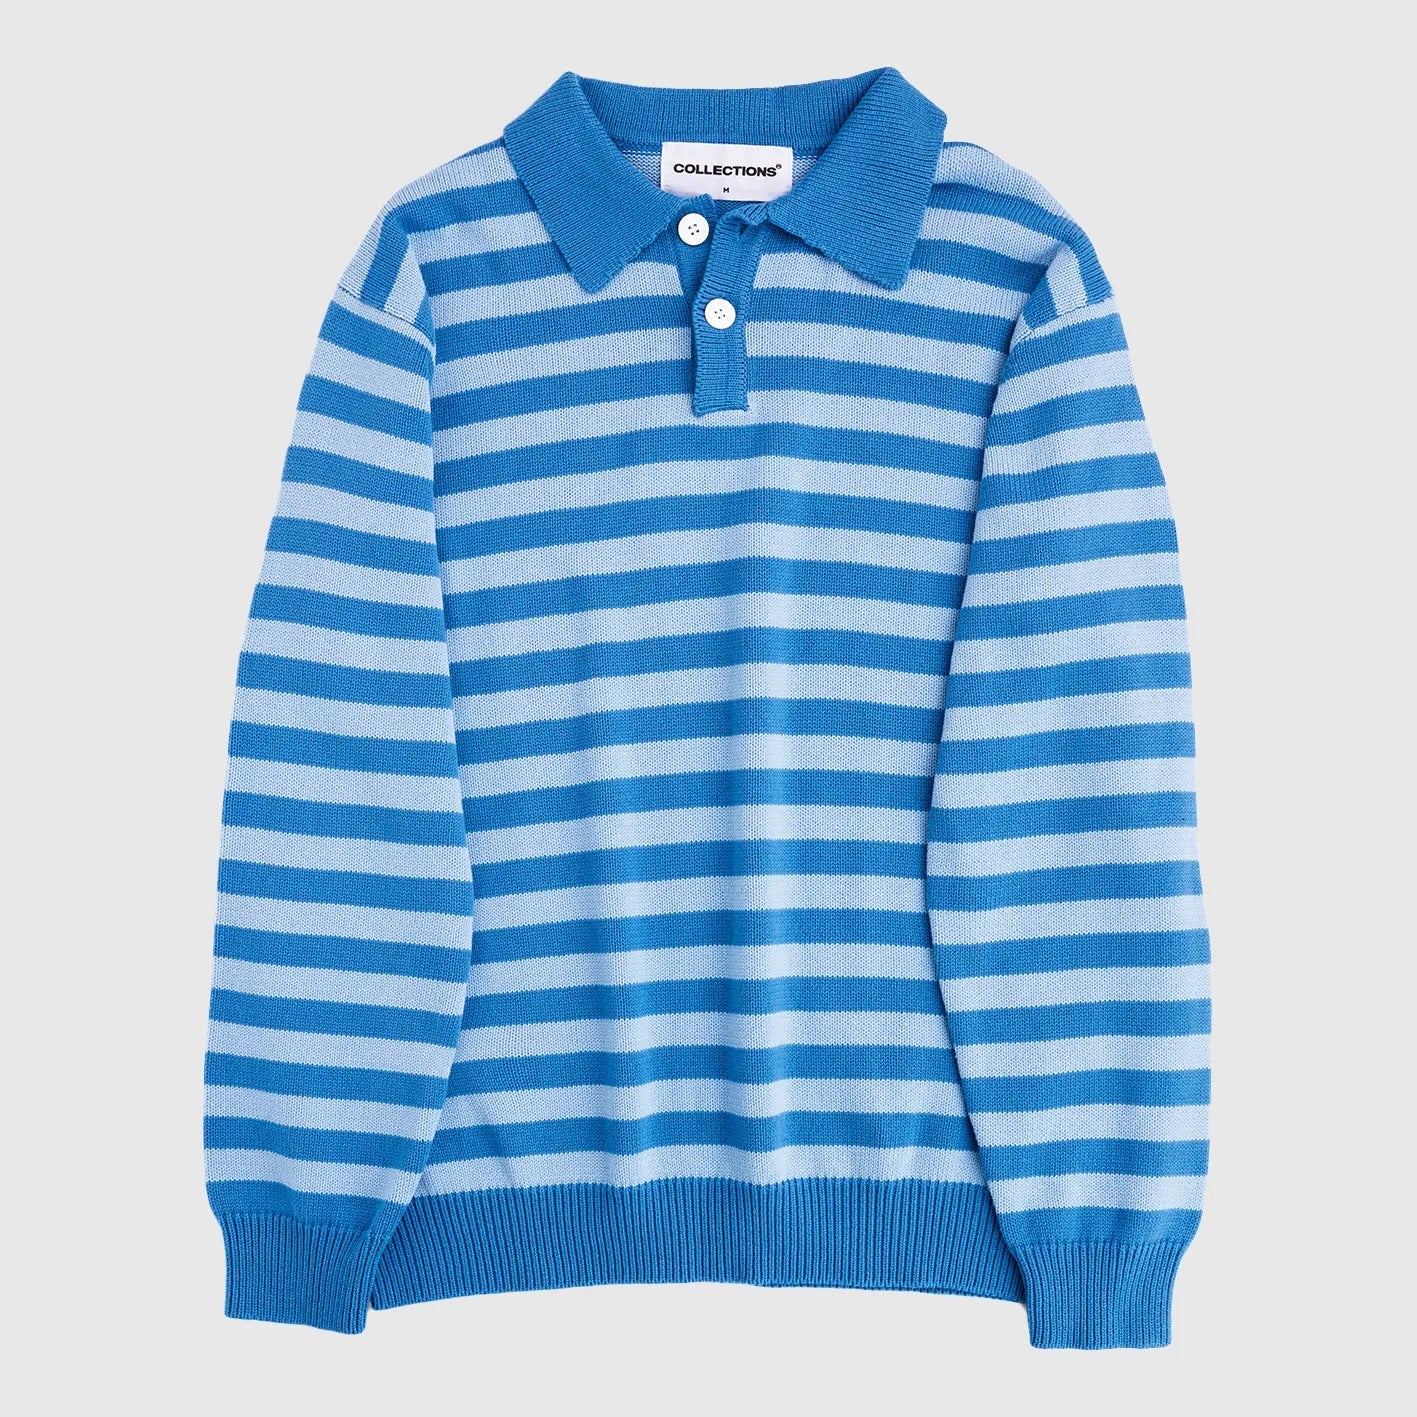 F5 Collections Bowen Sweater - Blue/Blue Sweatshirt F5 Collections 